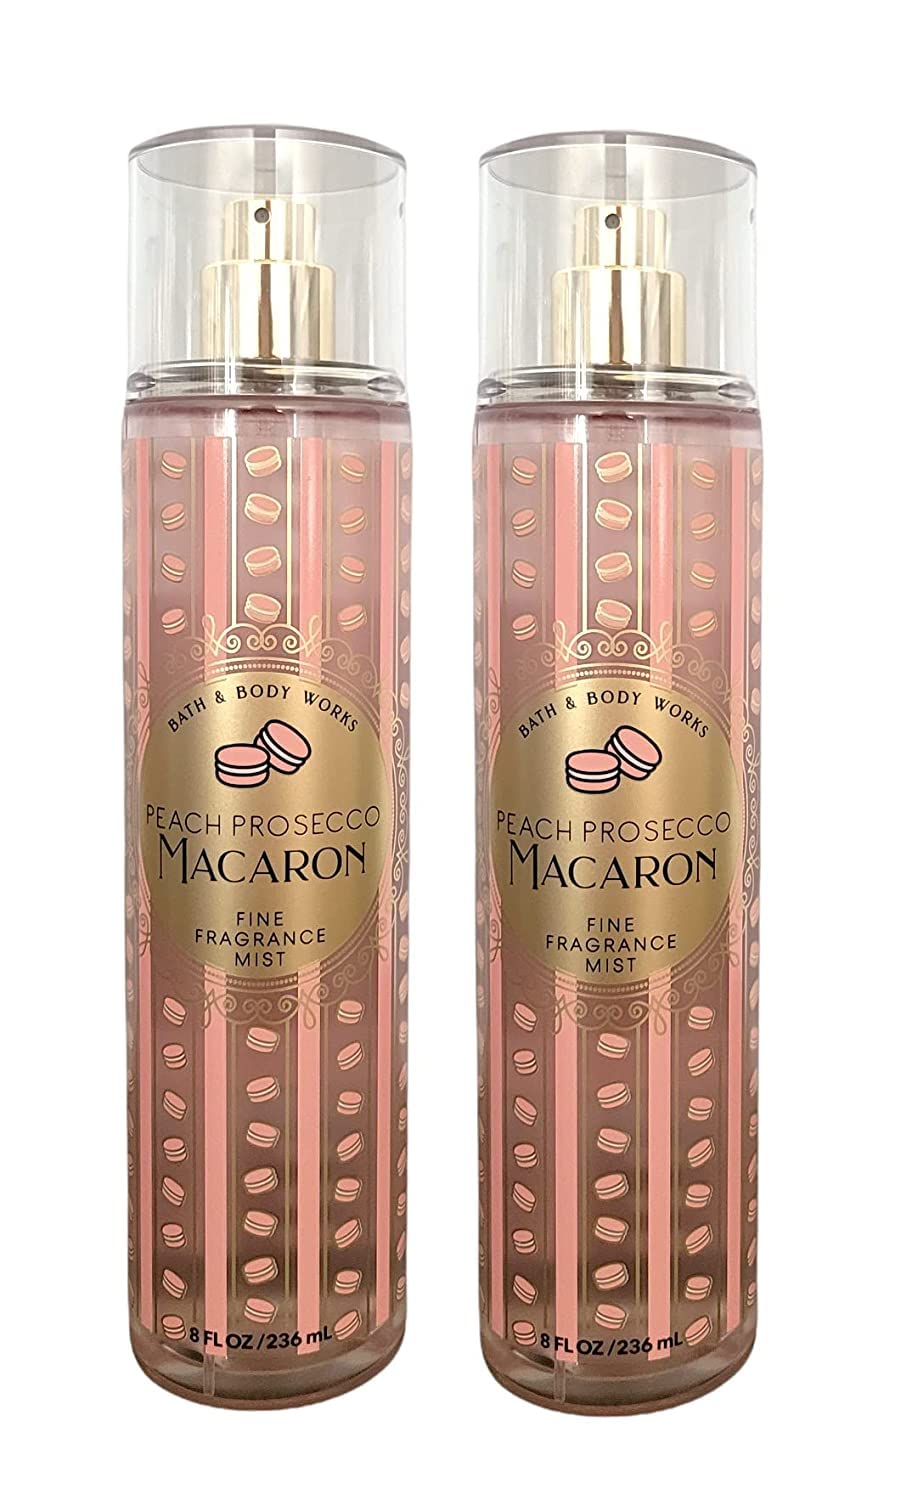 Bath and Body Works Peach Prosecco Macaron Fine Fragrance Body Mist Gift Set - Value Pack Lot of 2 (Peach Prosecco Macaron)